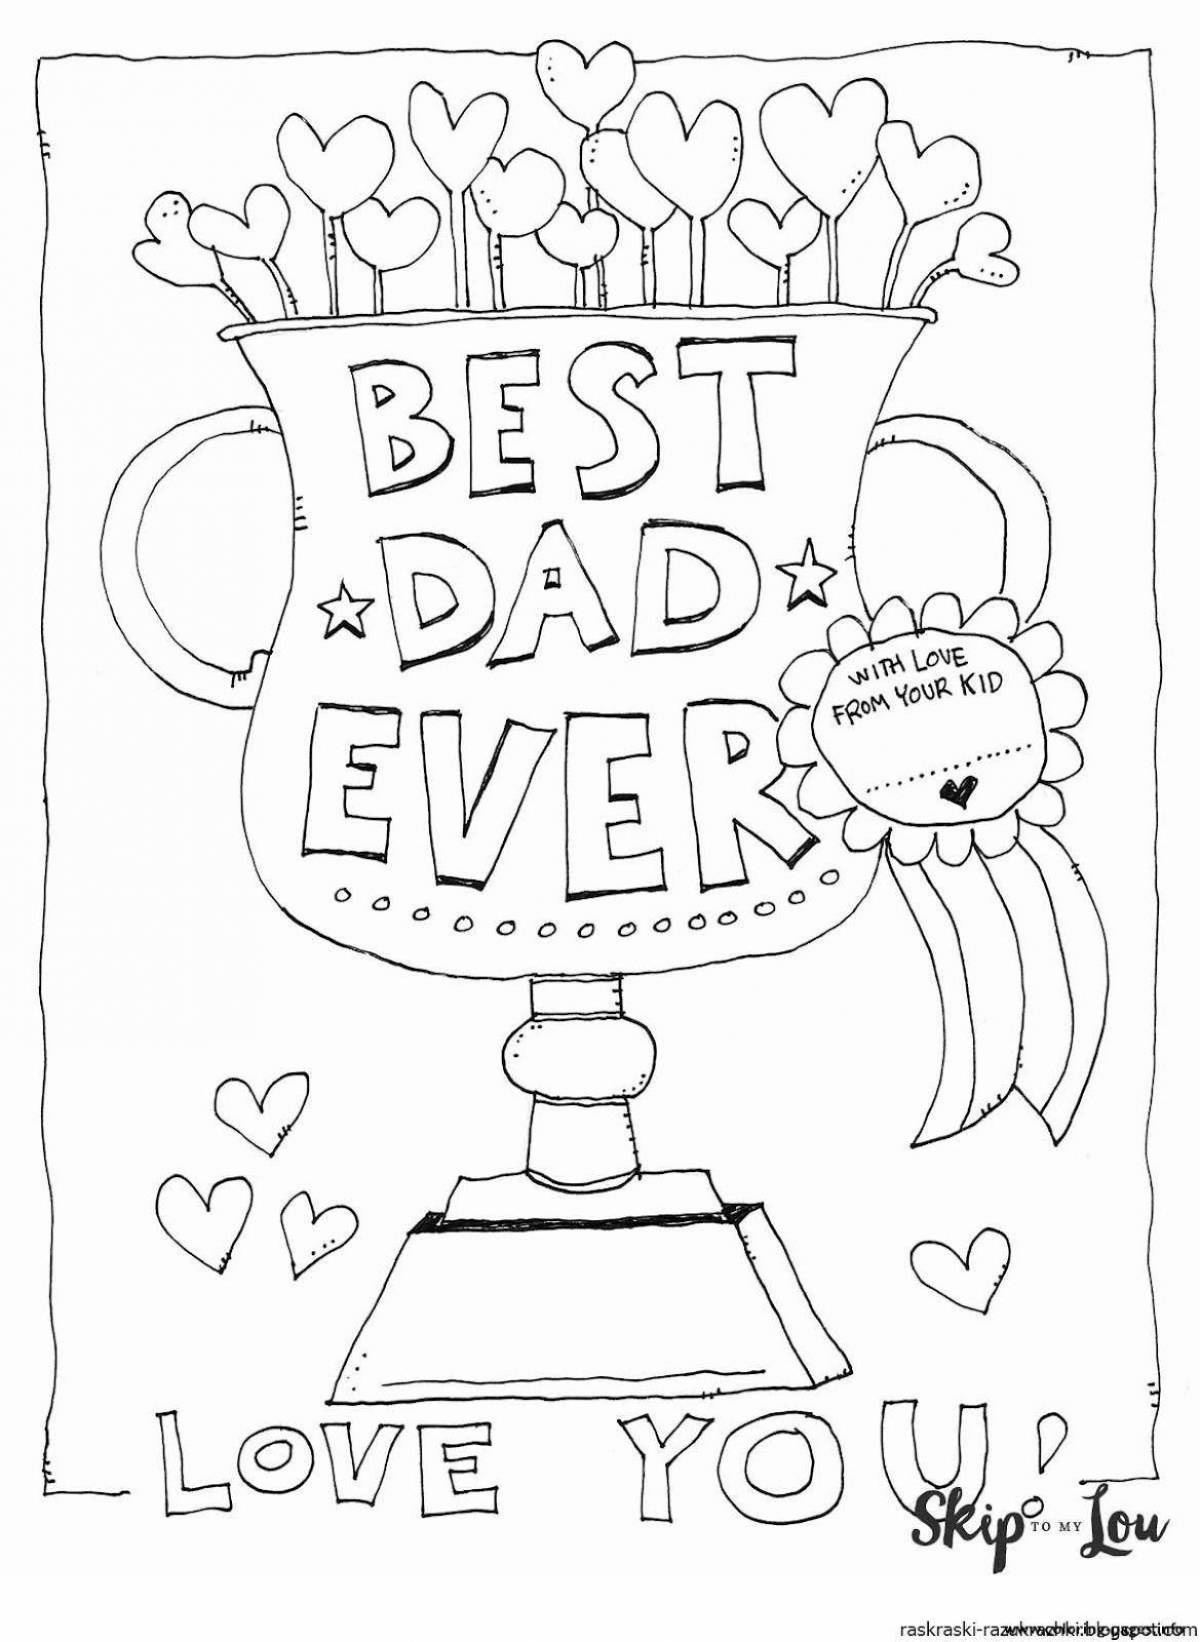 Color greeting card for dad from daughter